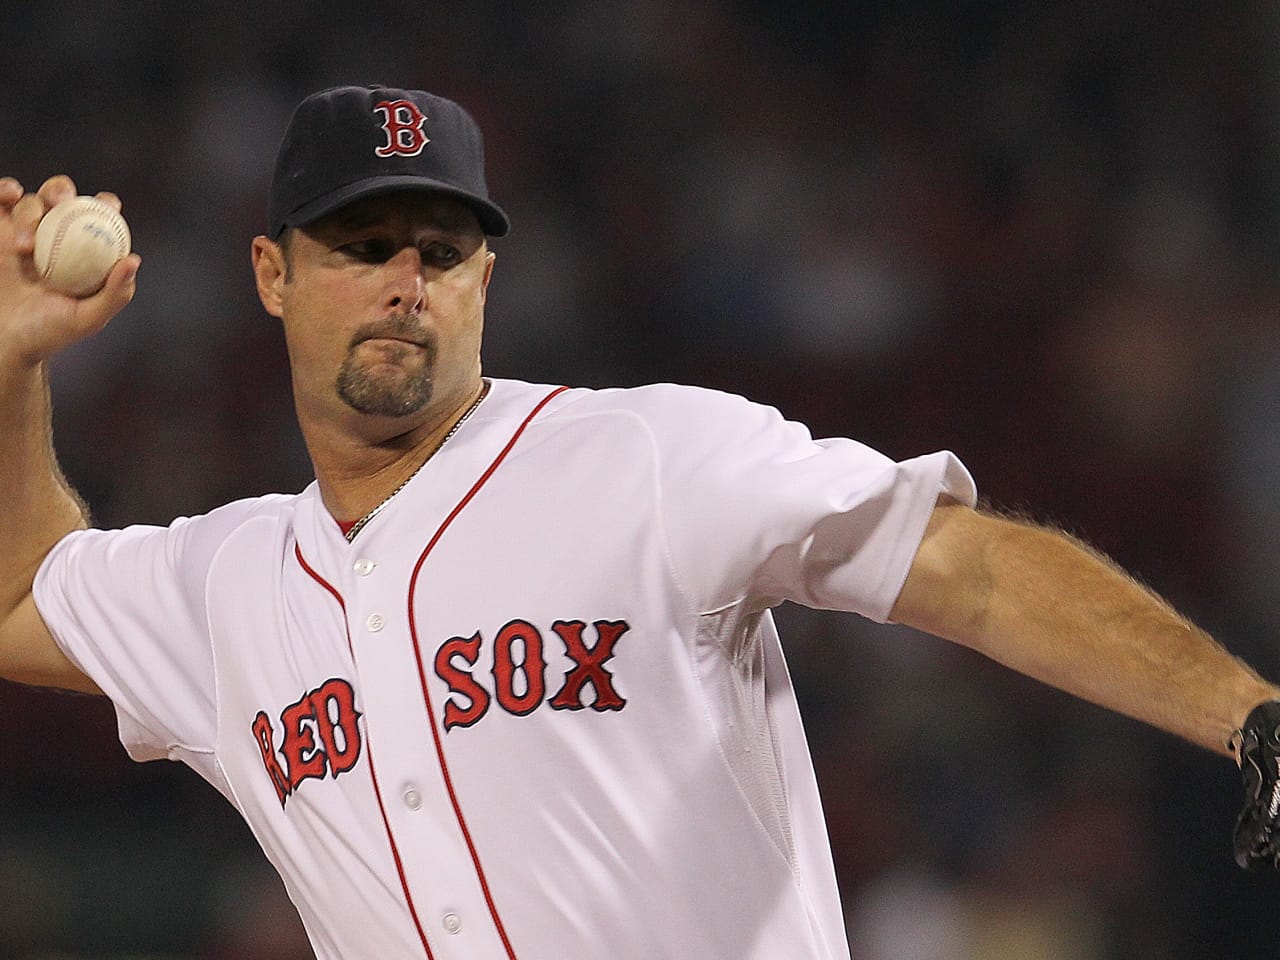 Tim Wakefield, knuckleballer who won 2 World Series with Red Sox